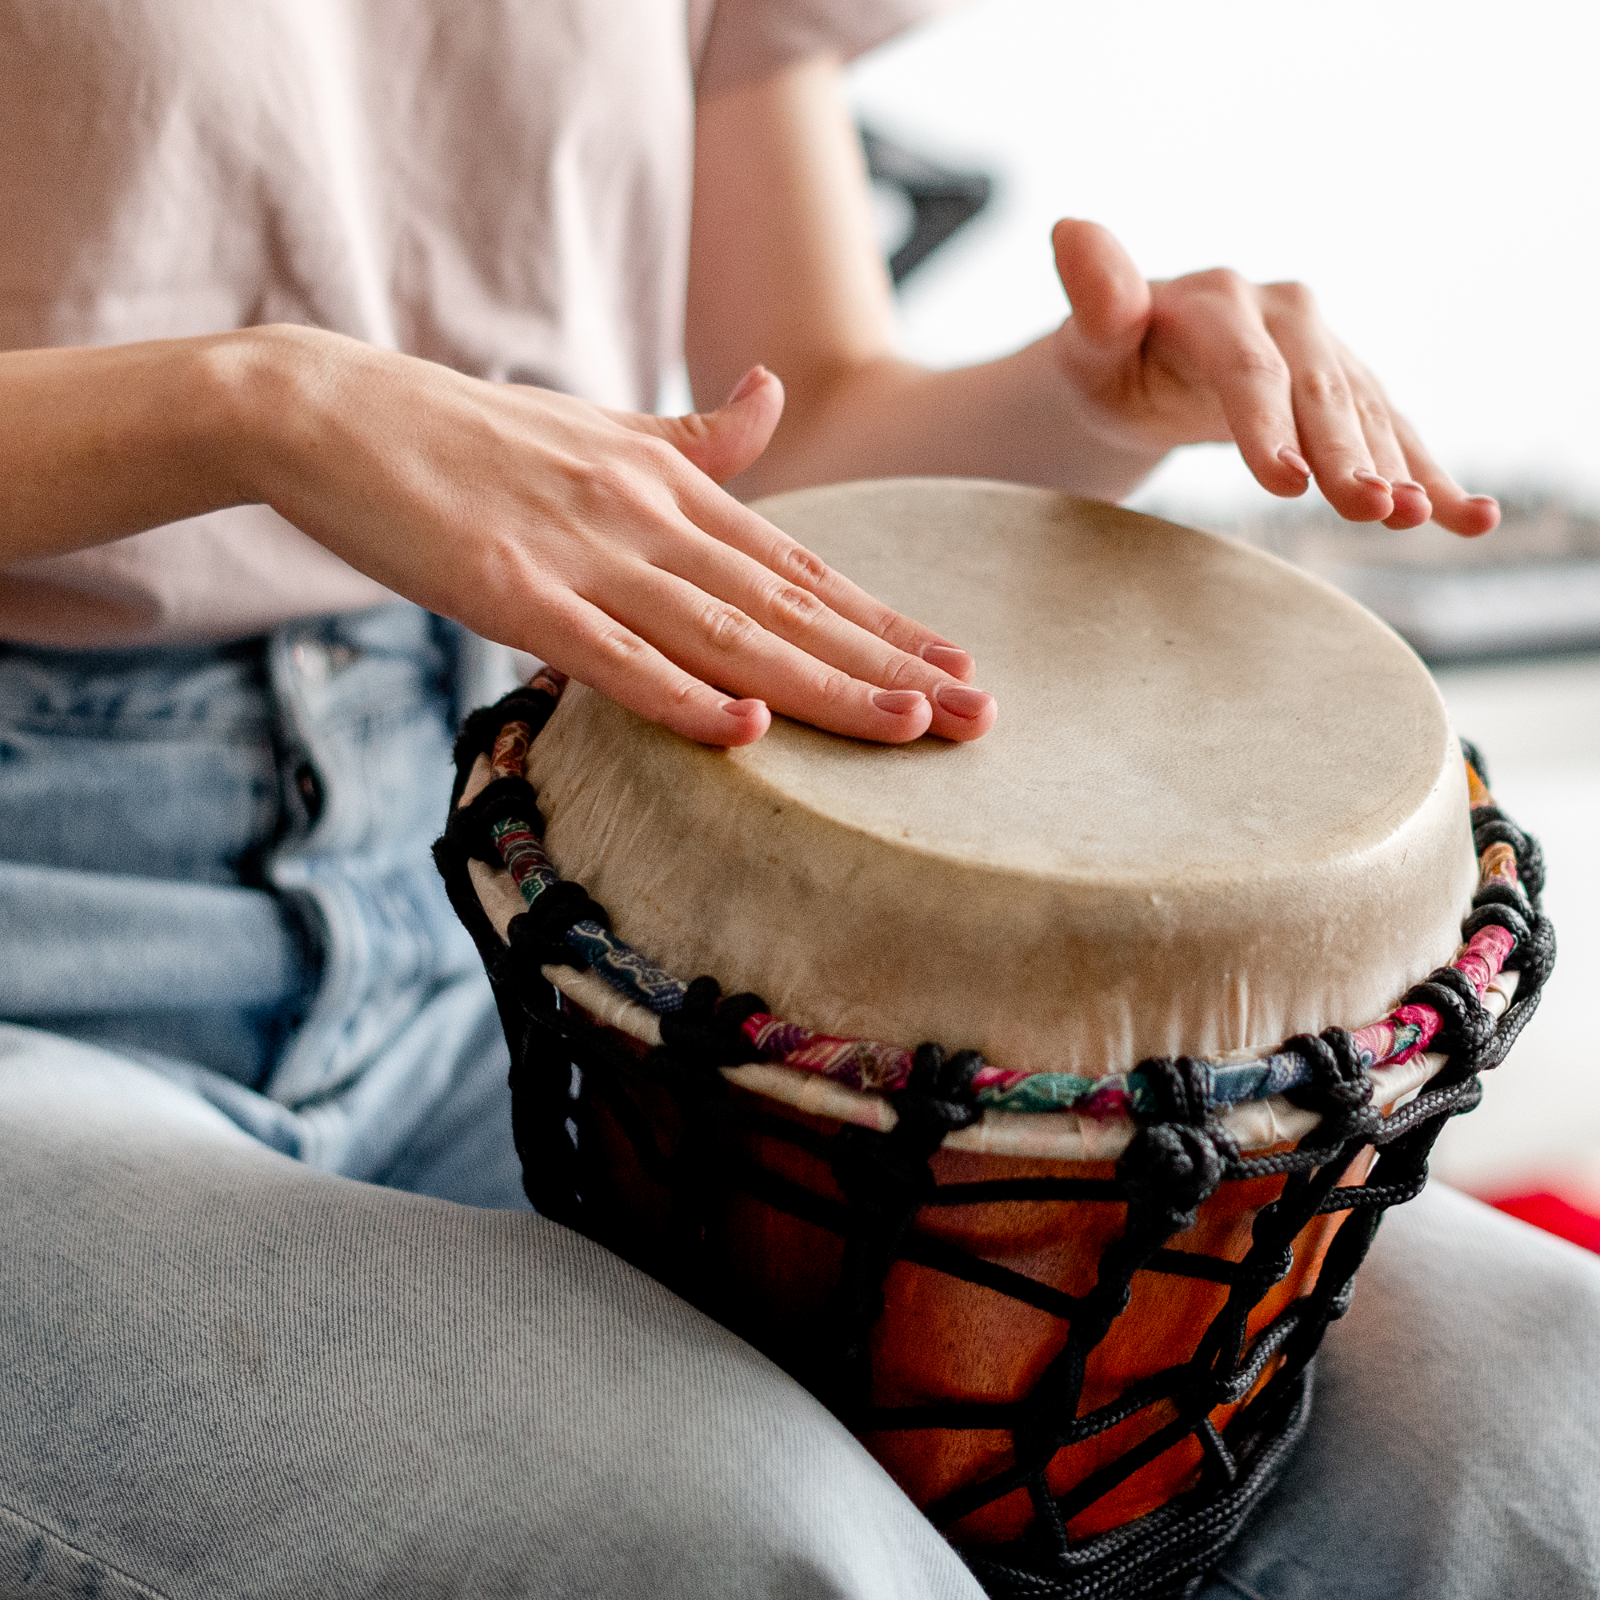 Adult djembe lesson 30 minutes : photo 1